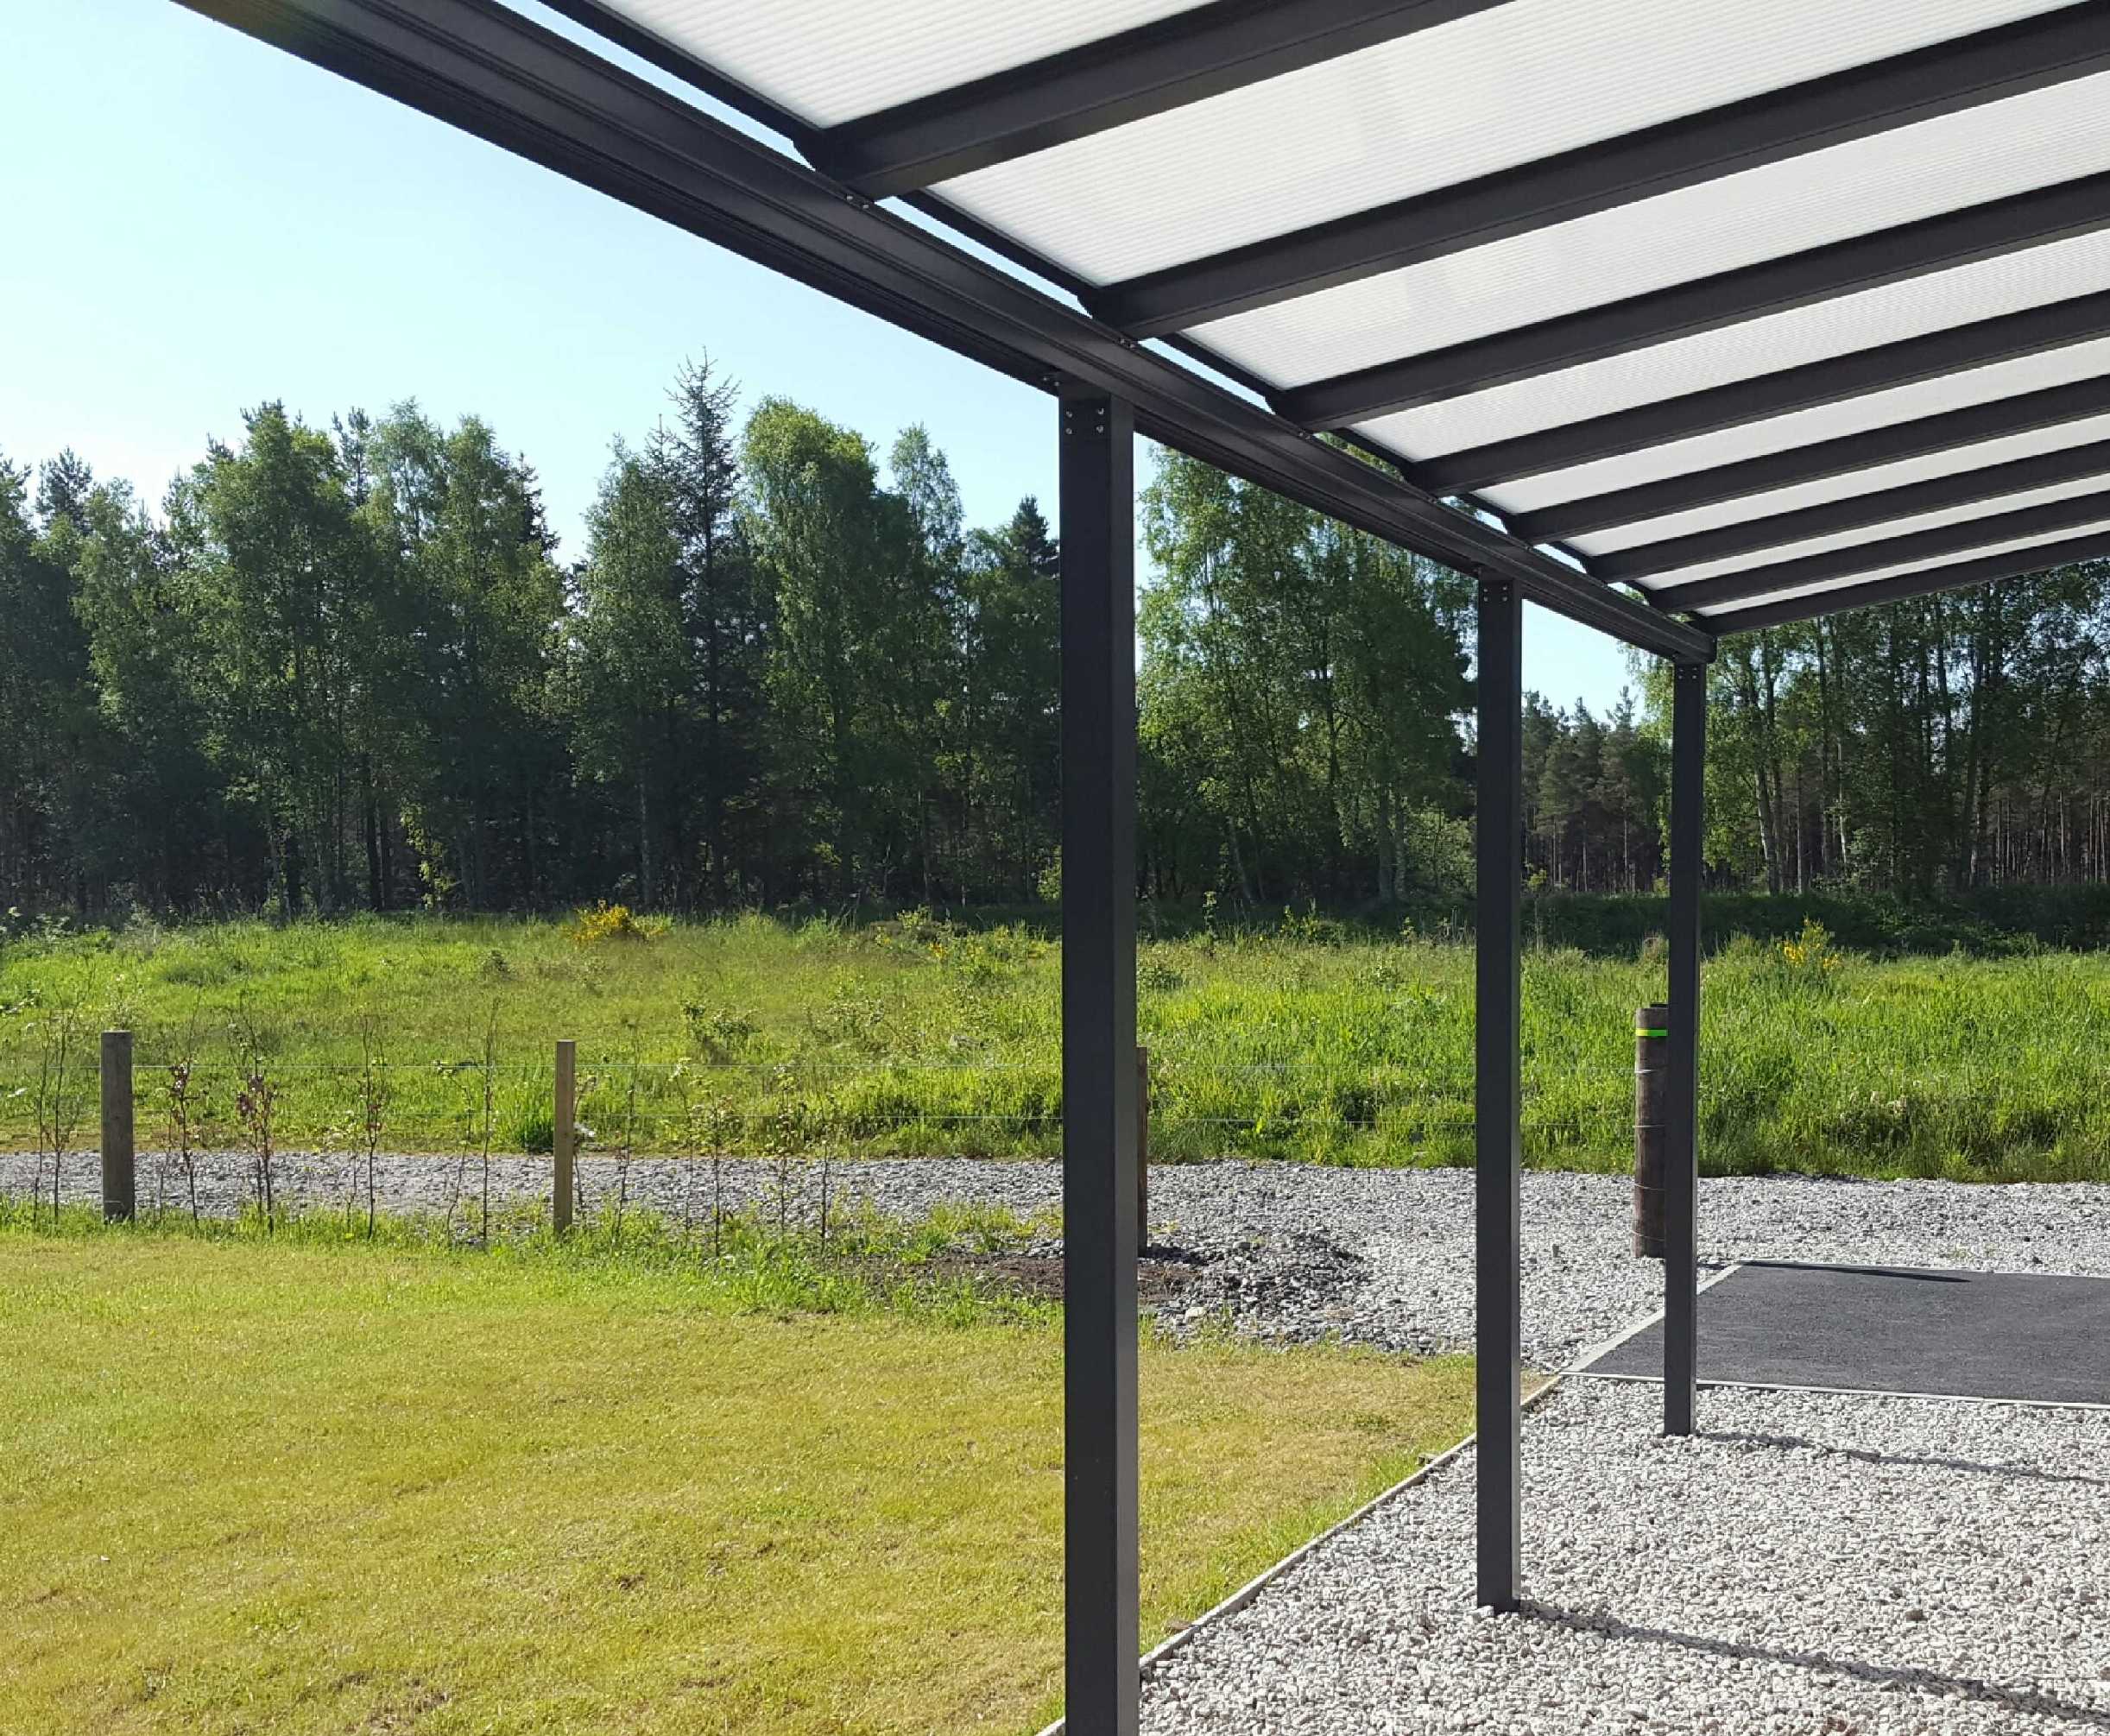 Omega Smart Lean-To Canopy, Anthracite Grey, 6mm Glass Clear Plate Polycarbonate Glazing - 2.8m (W) x 1.5m (P), (2) Supporting Posts